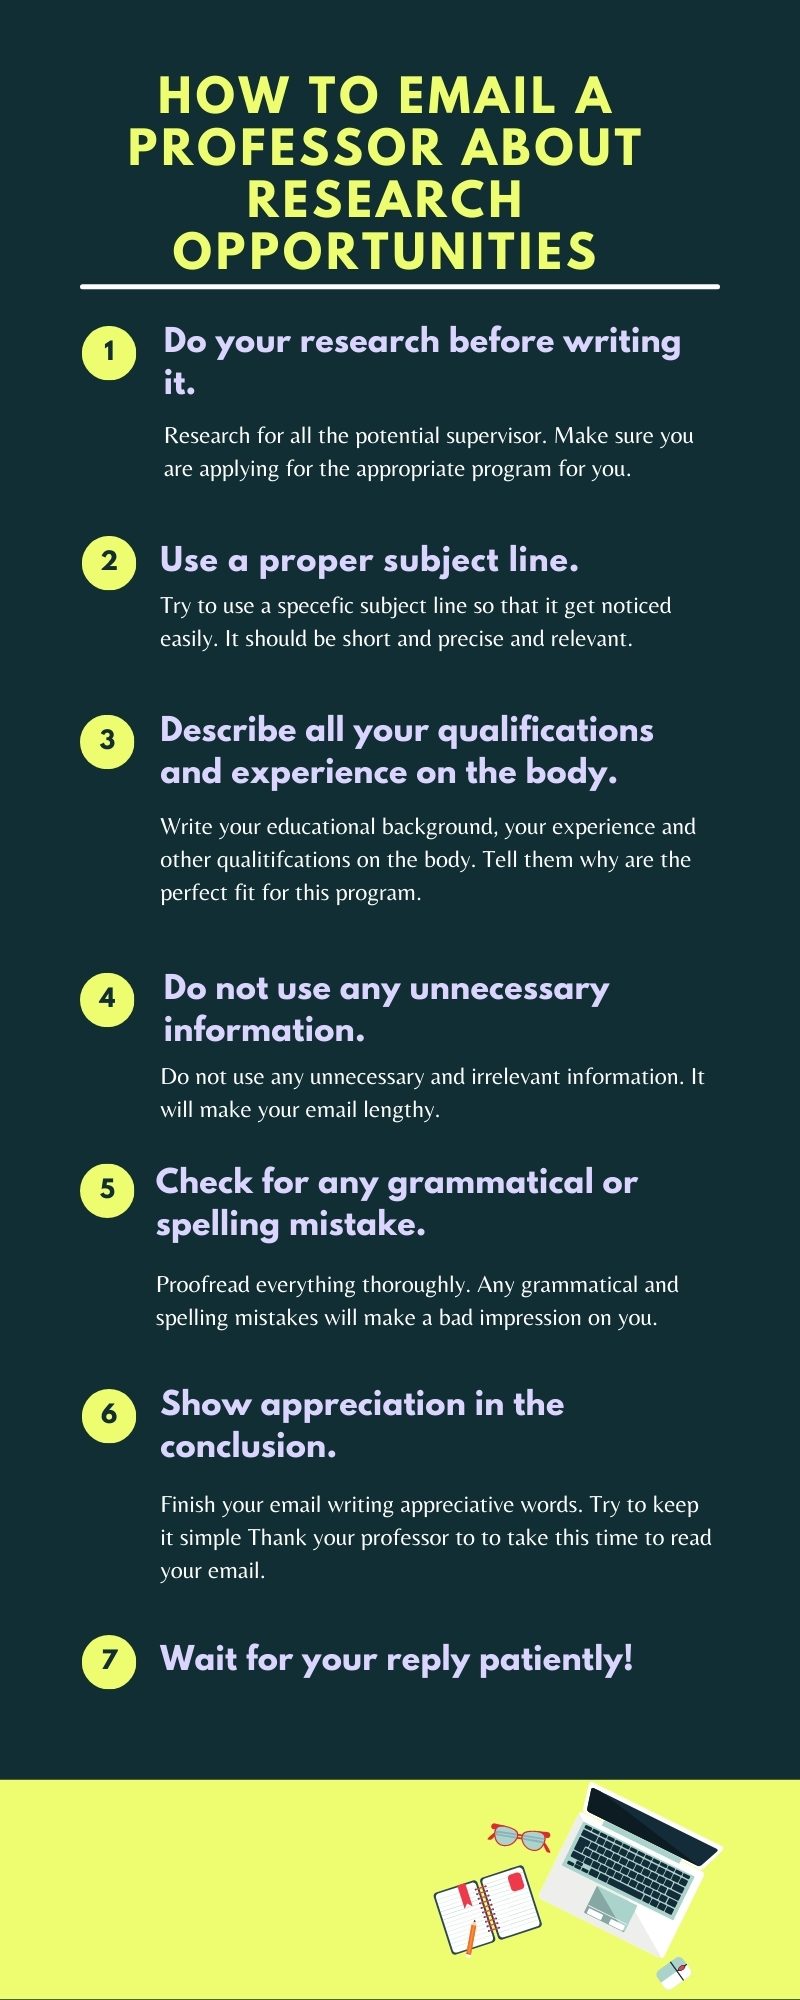 Infographics - how to email a professor about research opportunities